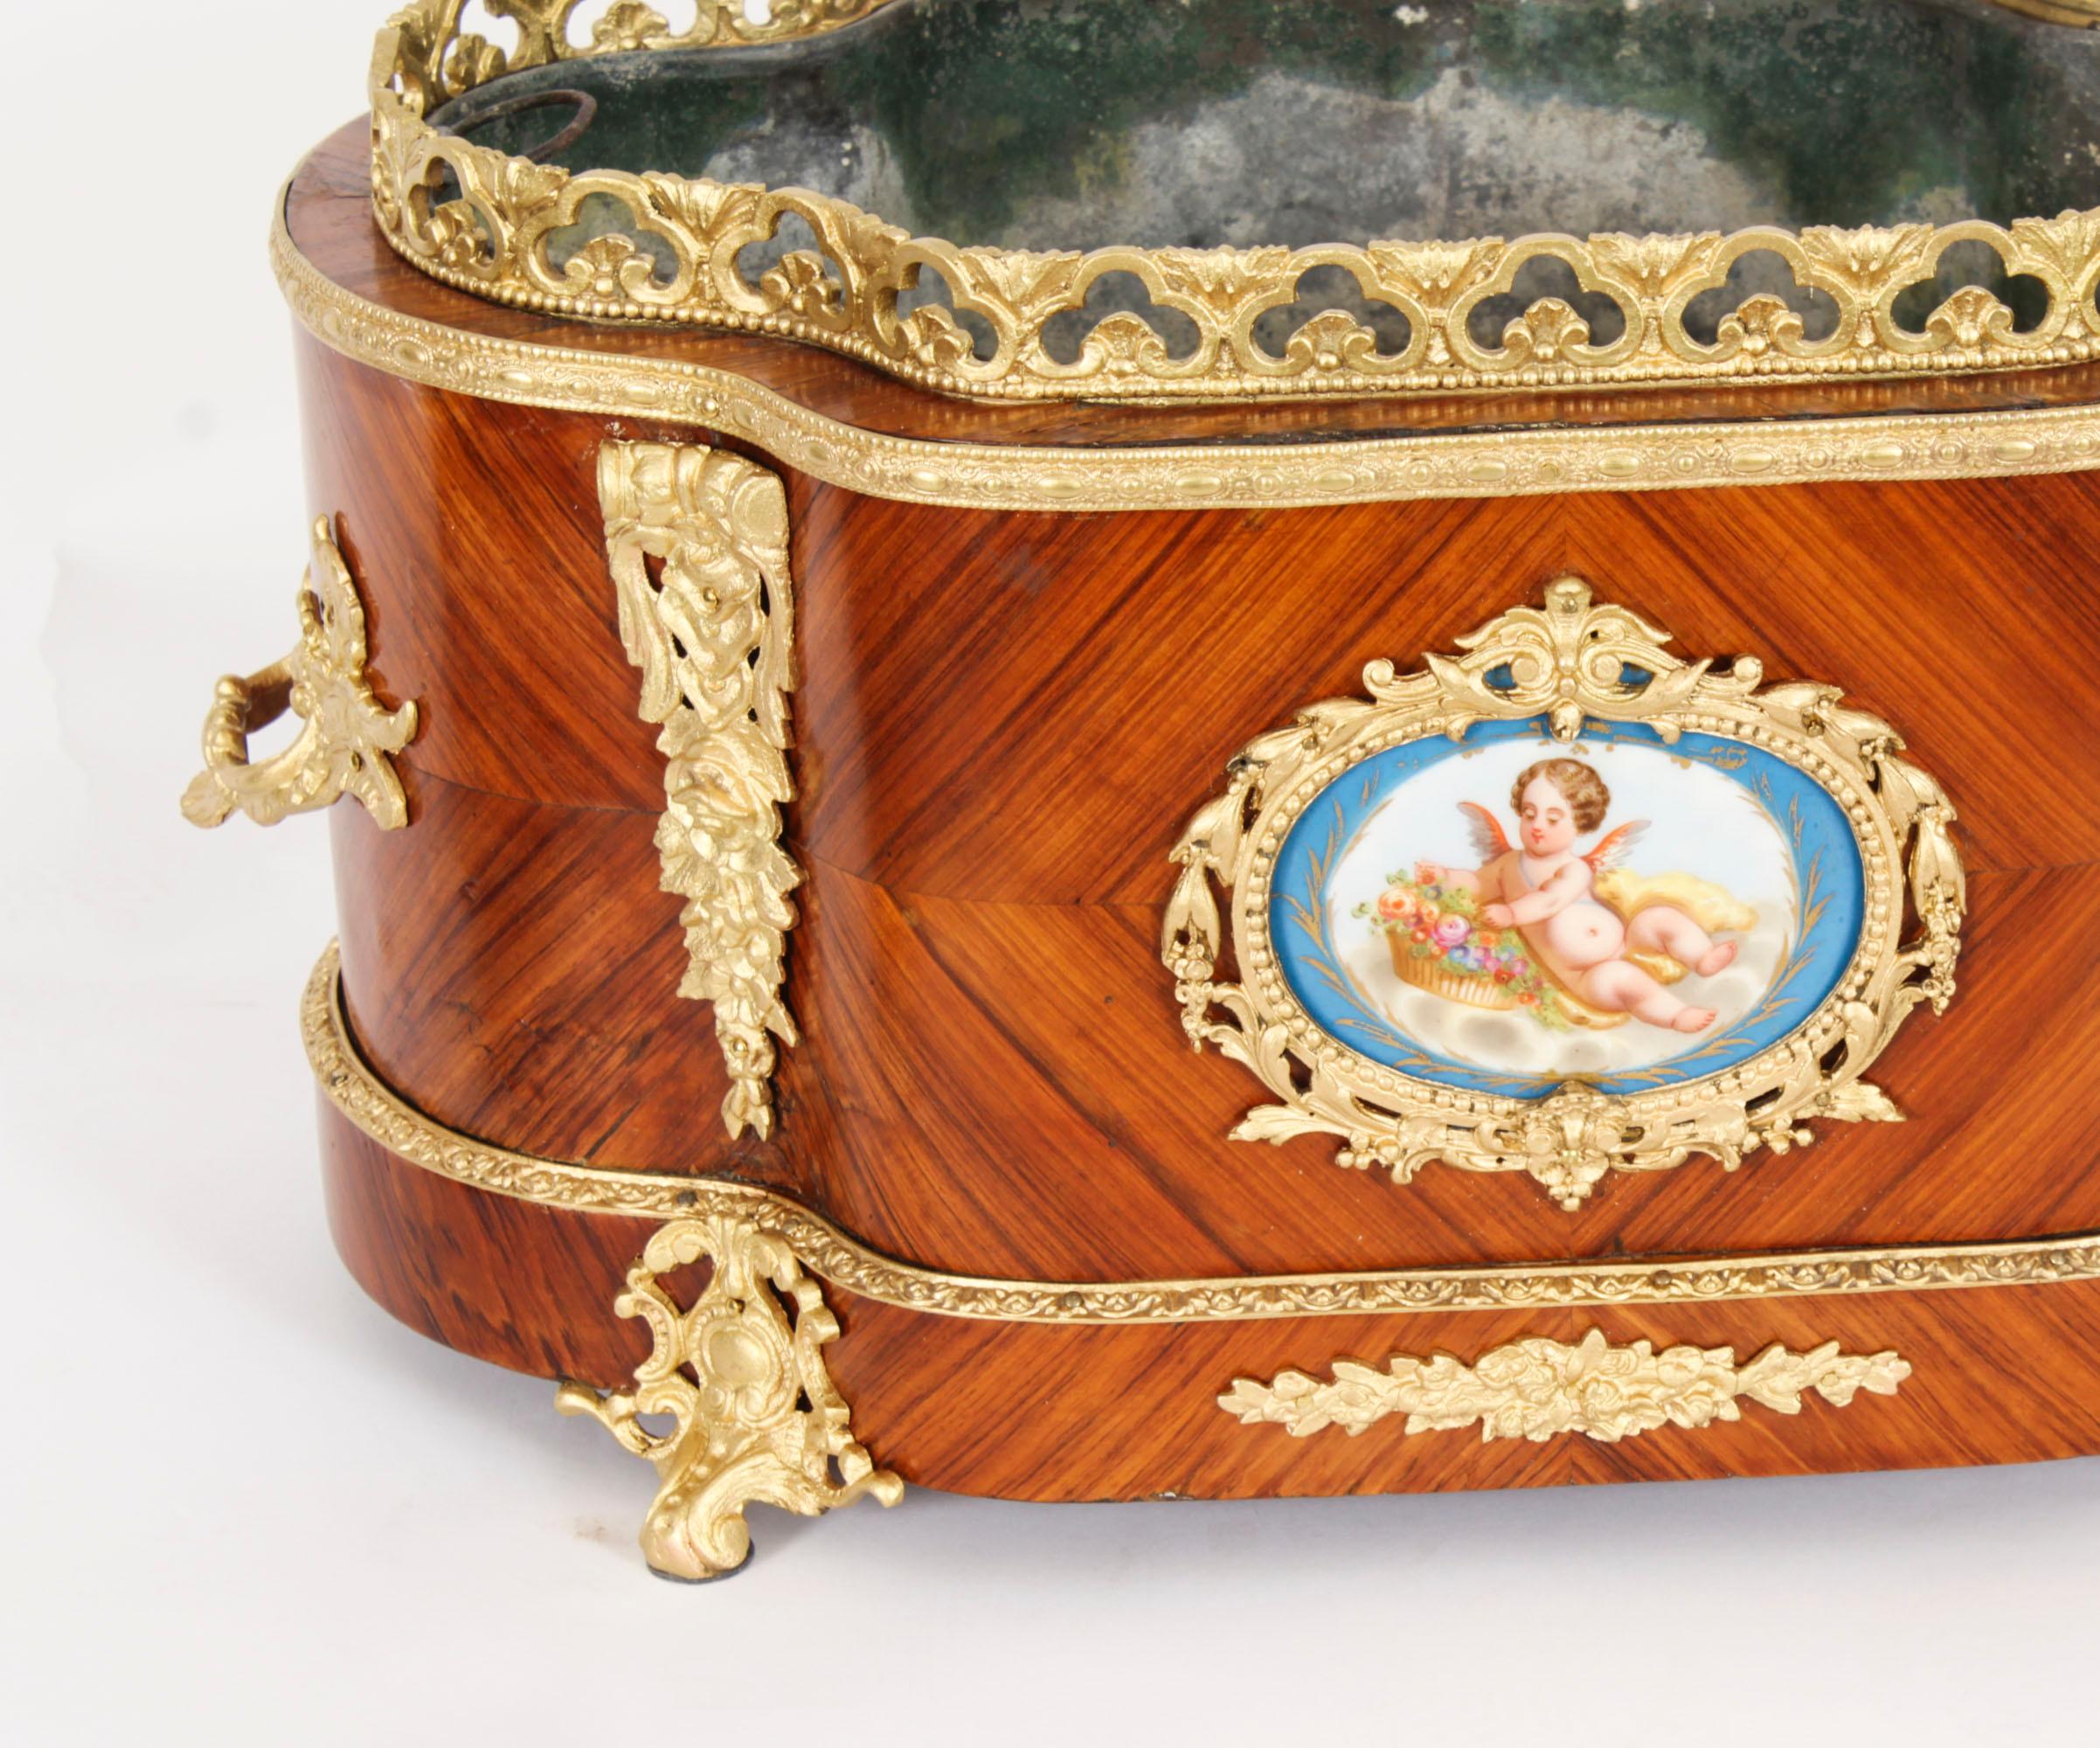 Antique French Sevres Porcelain Ormolu Mounted Planter Jardiniere 19th Century For Sale 2